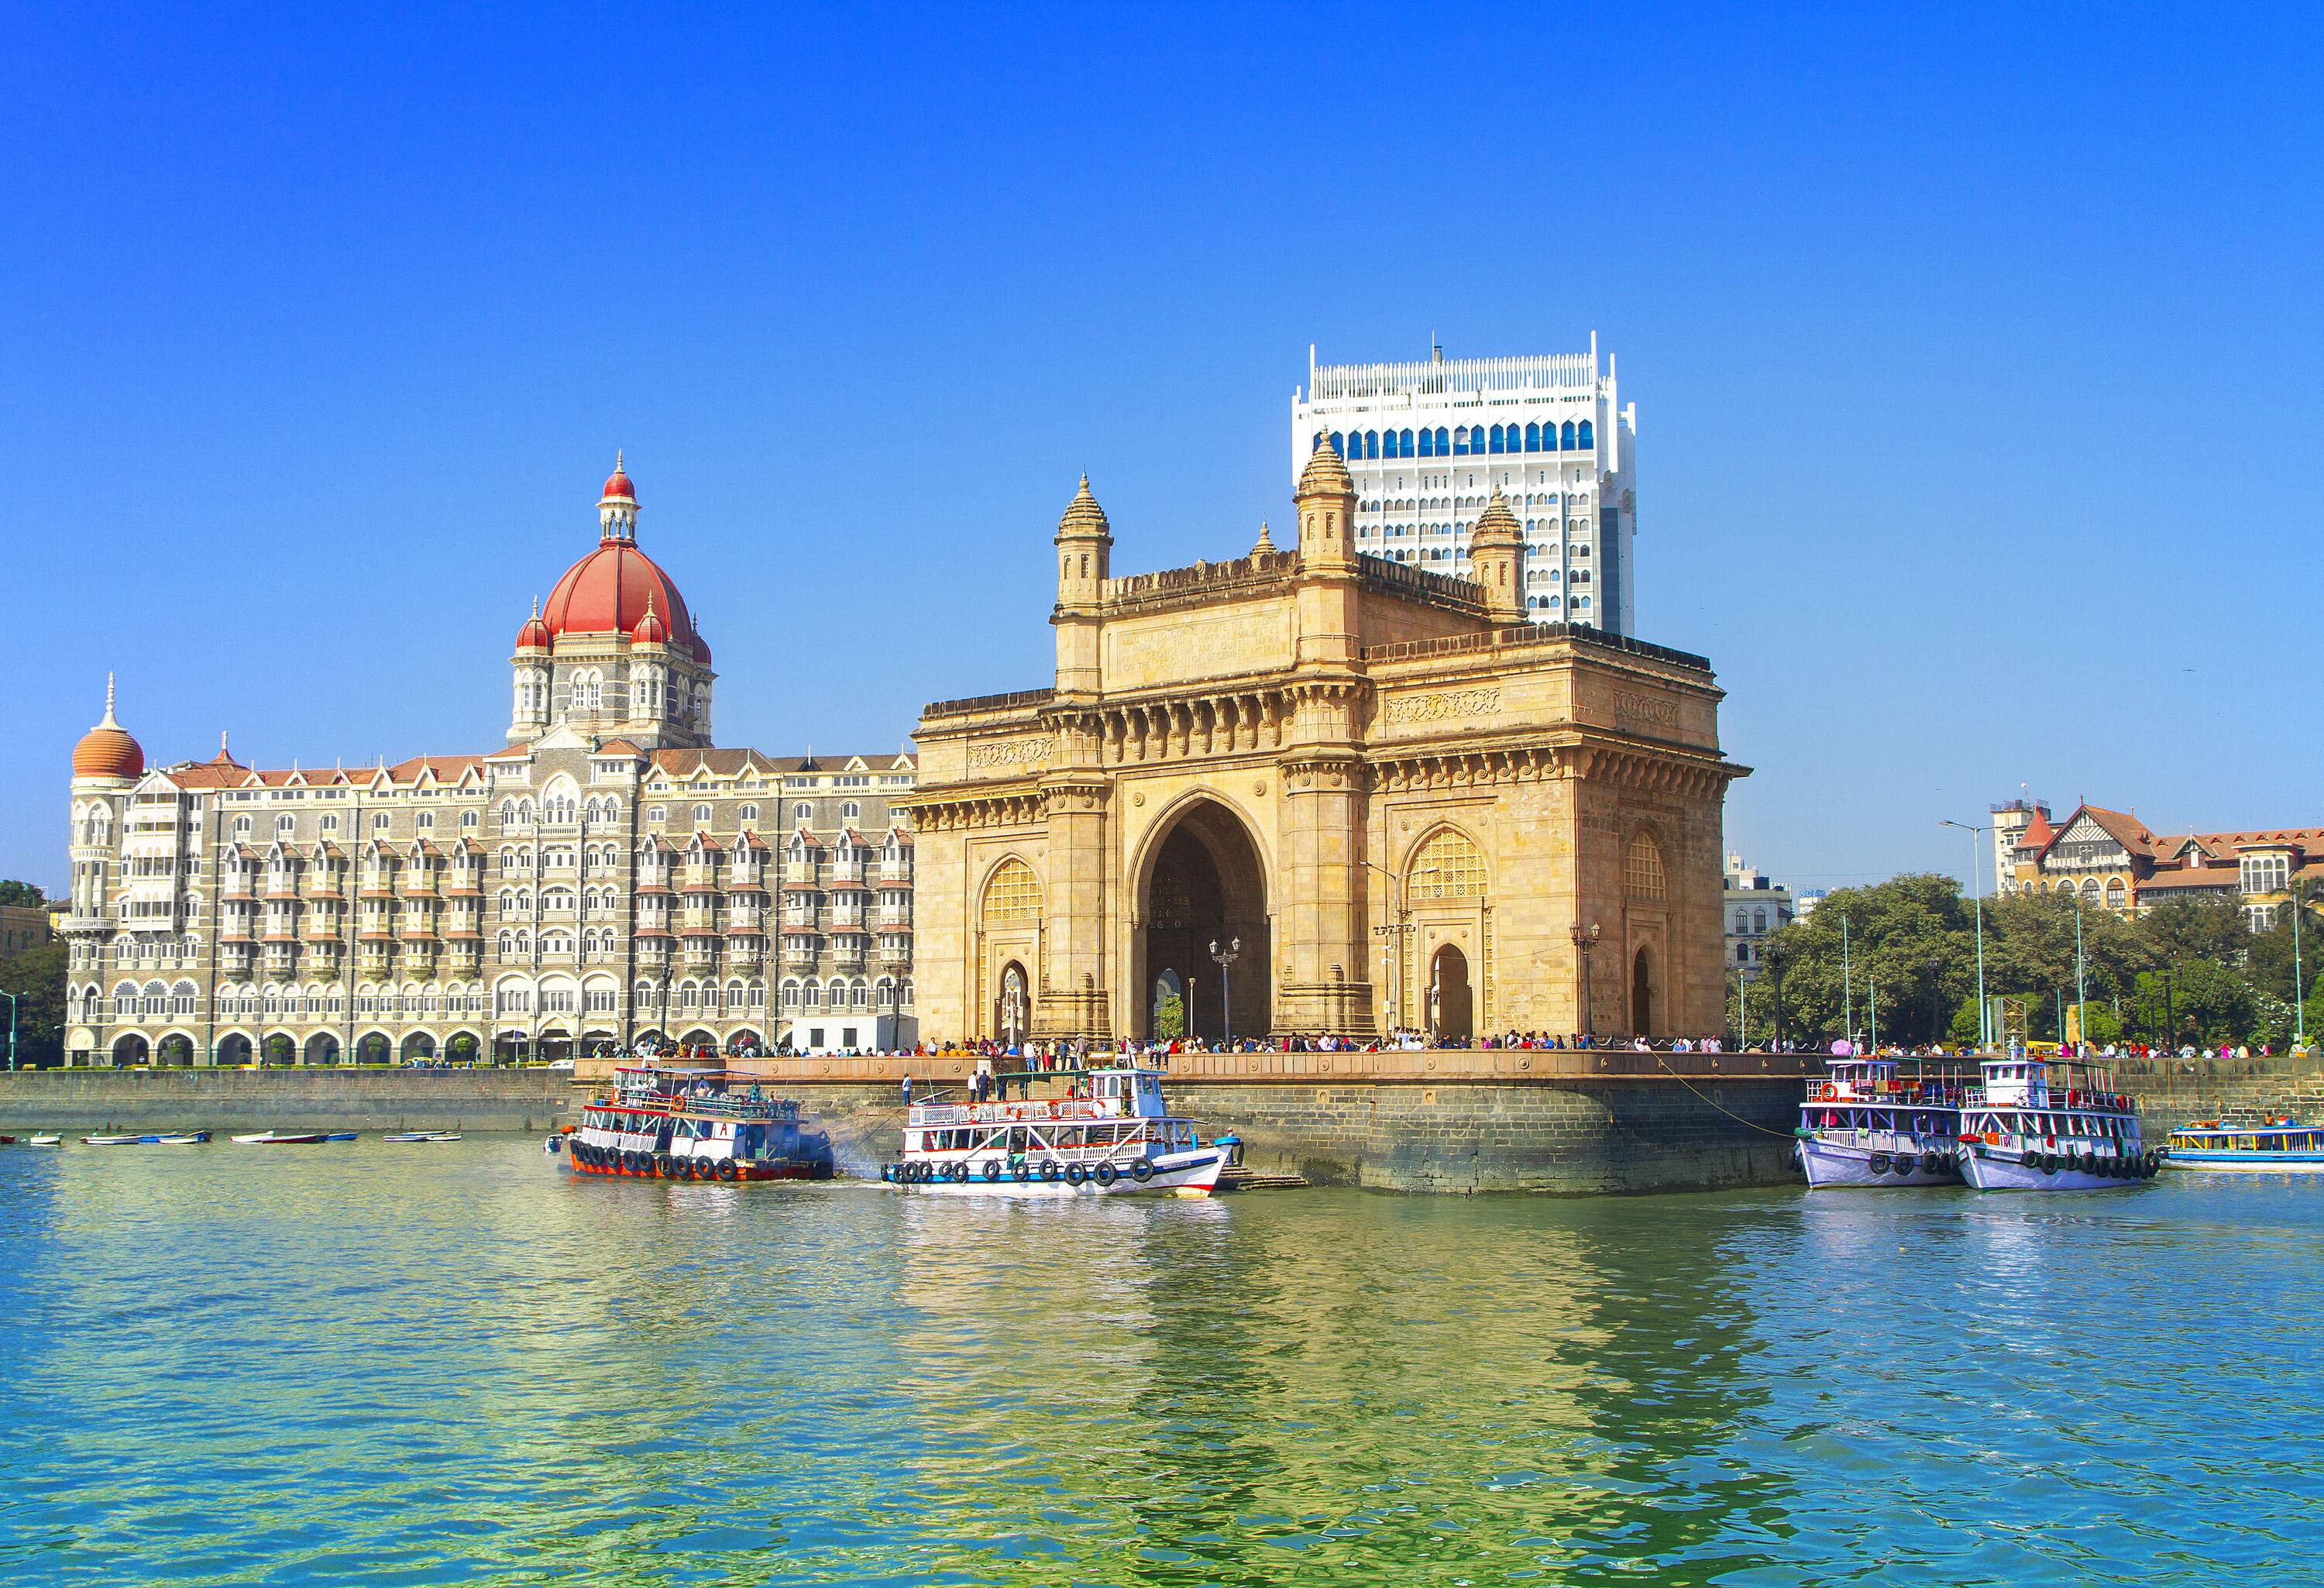 An enormous arch-monument gateway along the harbour stands beside the iconic Taj Mahal Palace.